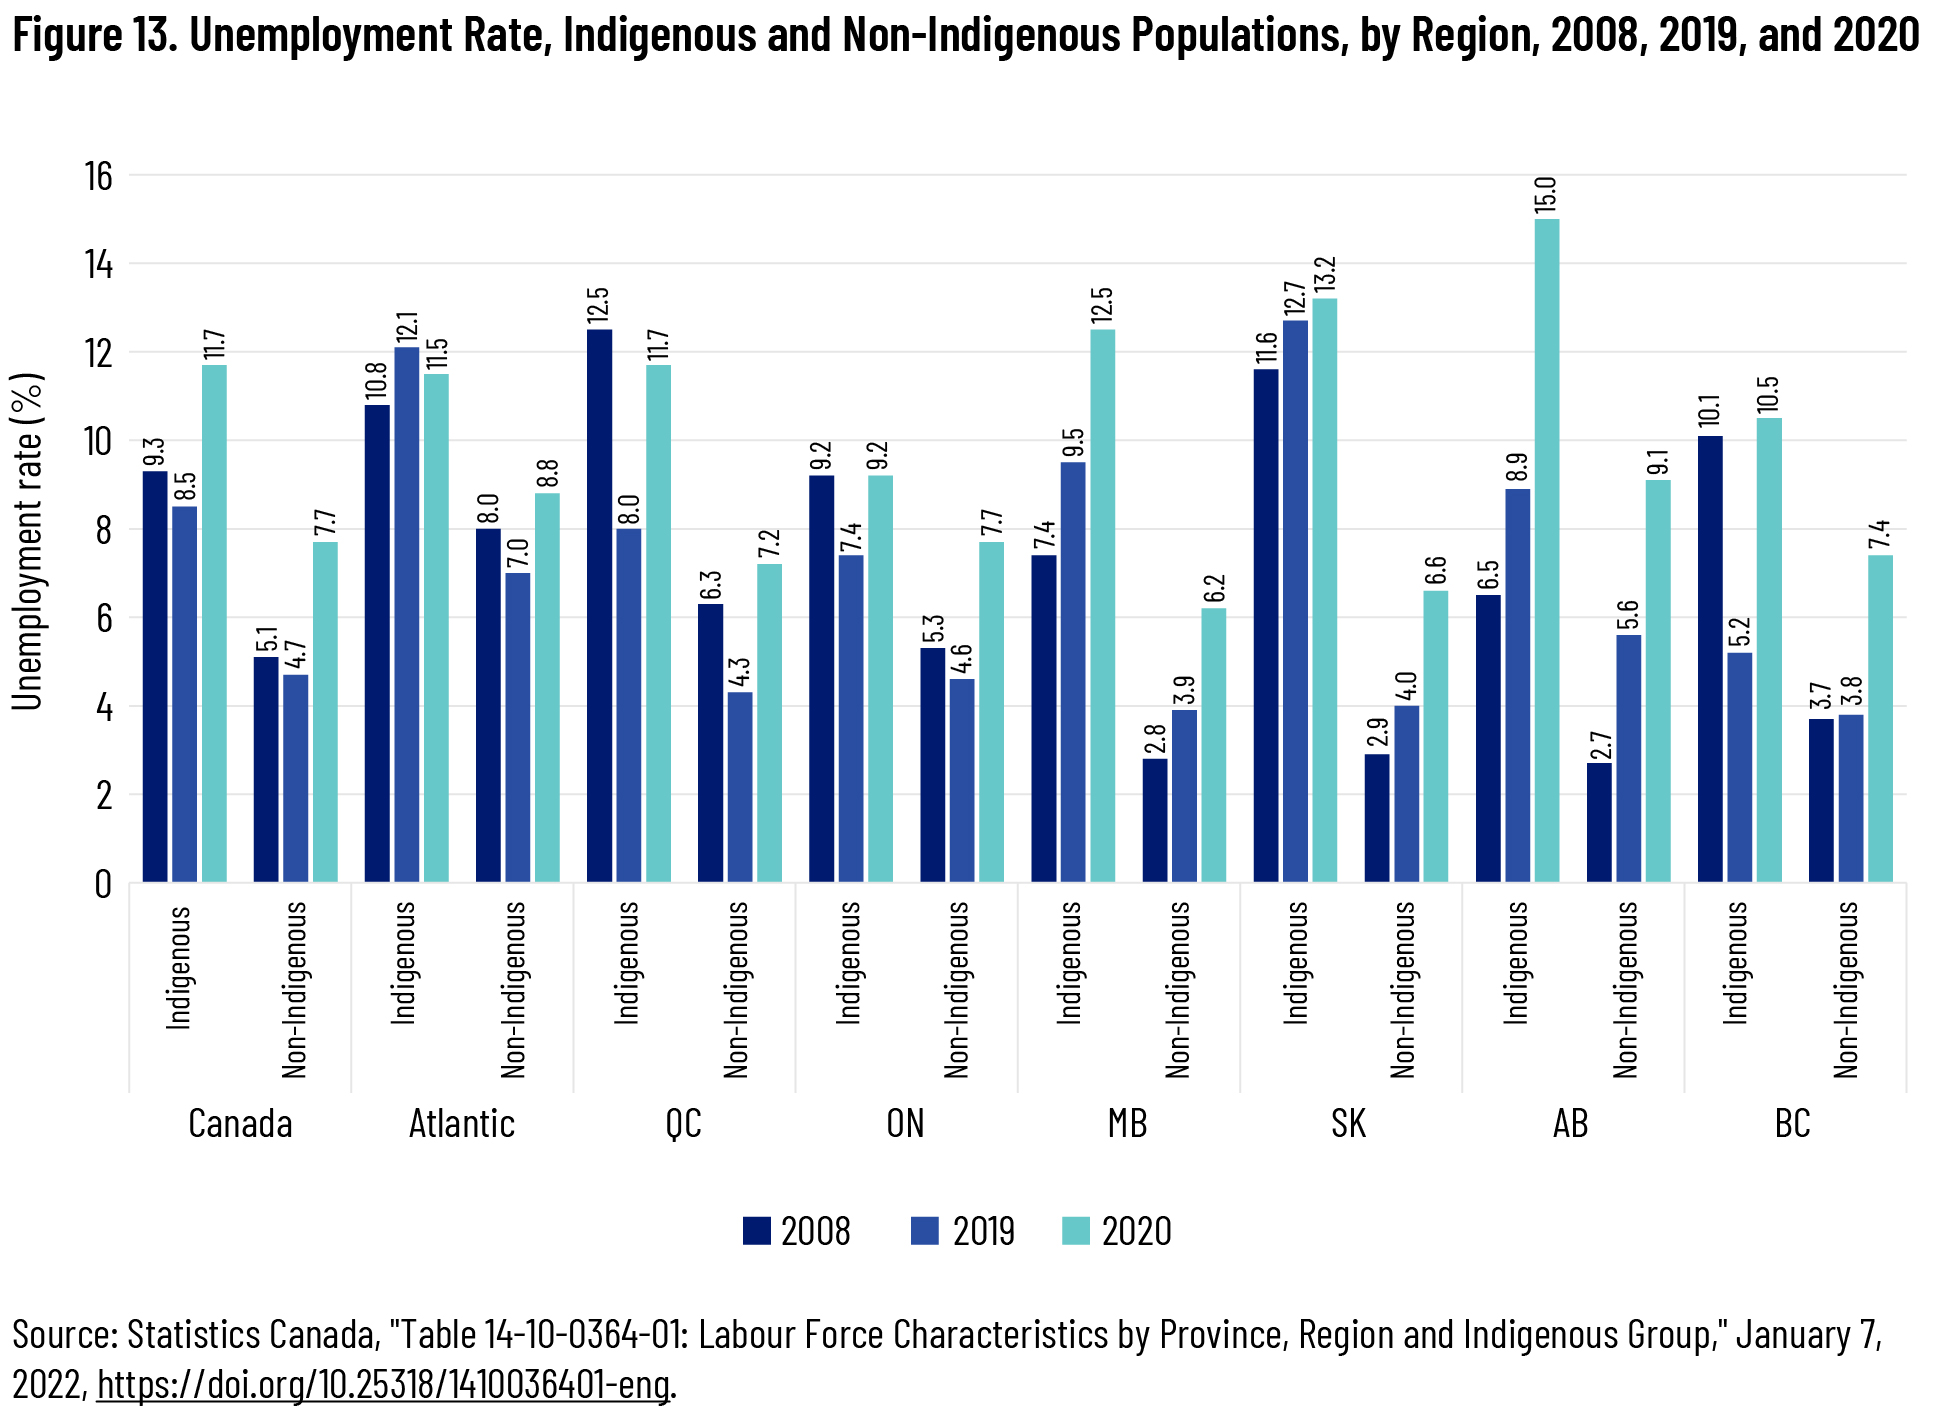 Figure 13. Unemployment Rate, Indigenous and Non-Indigenous Populations, by Region, 2008, 2019, and 2020